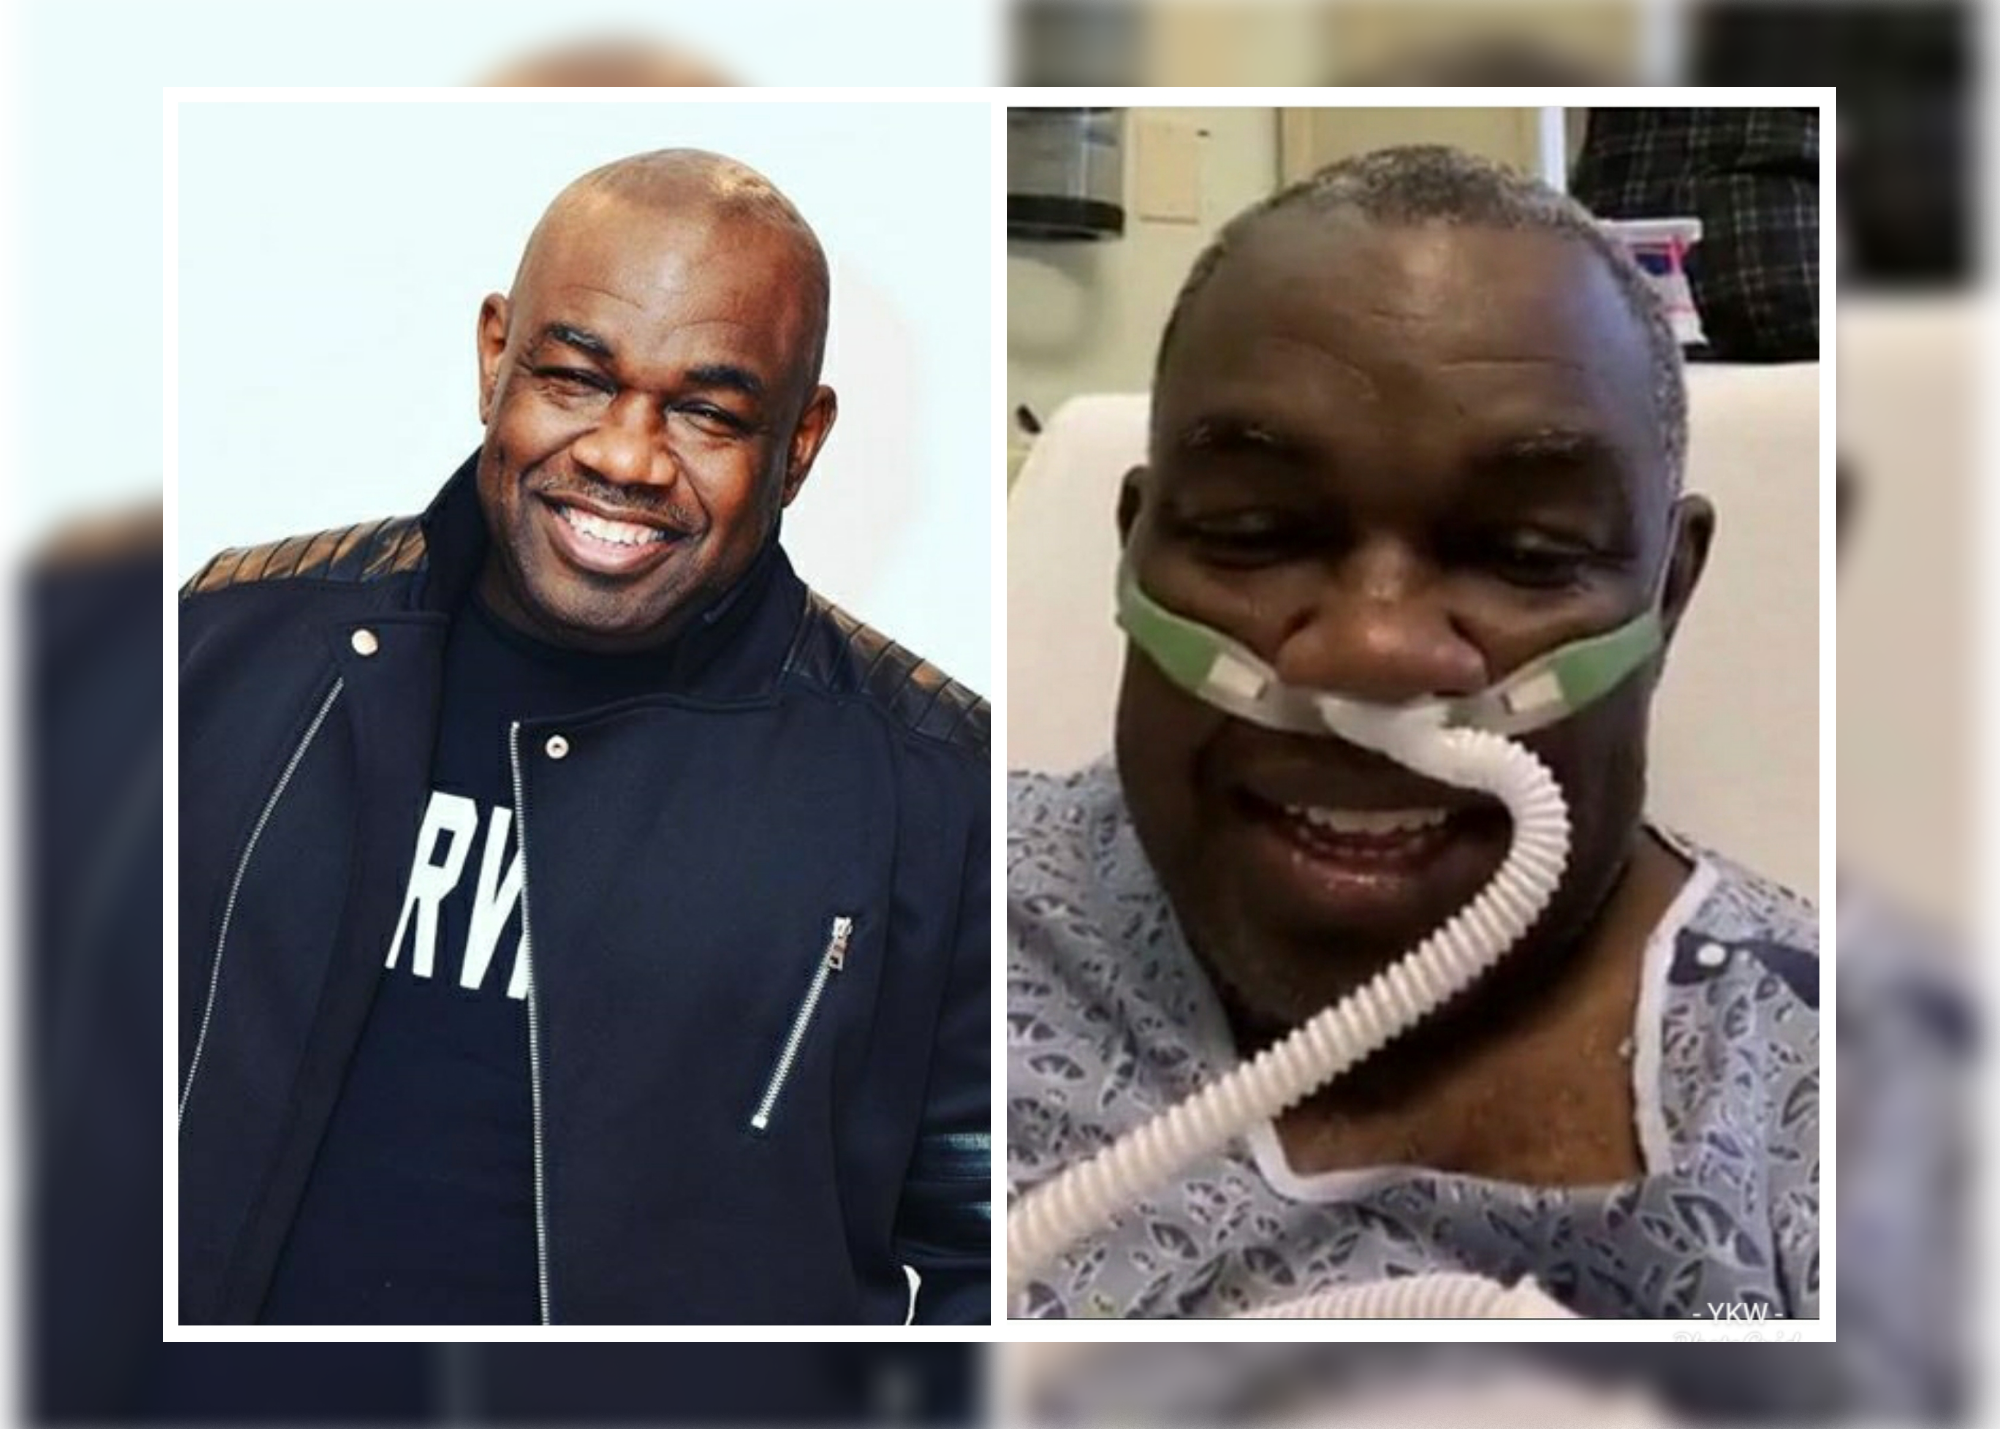 Prayers Up: Comedian Rodney Perry Hospitalized After Testing Positive For COVID-19